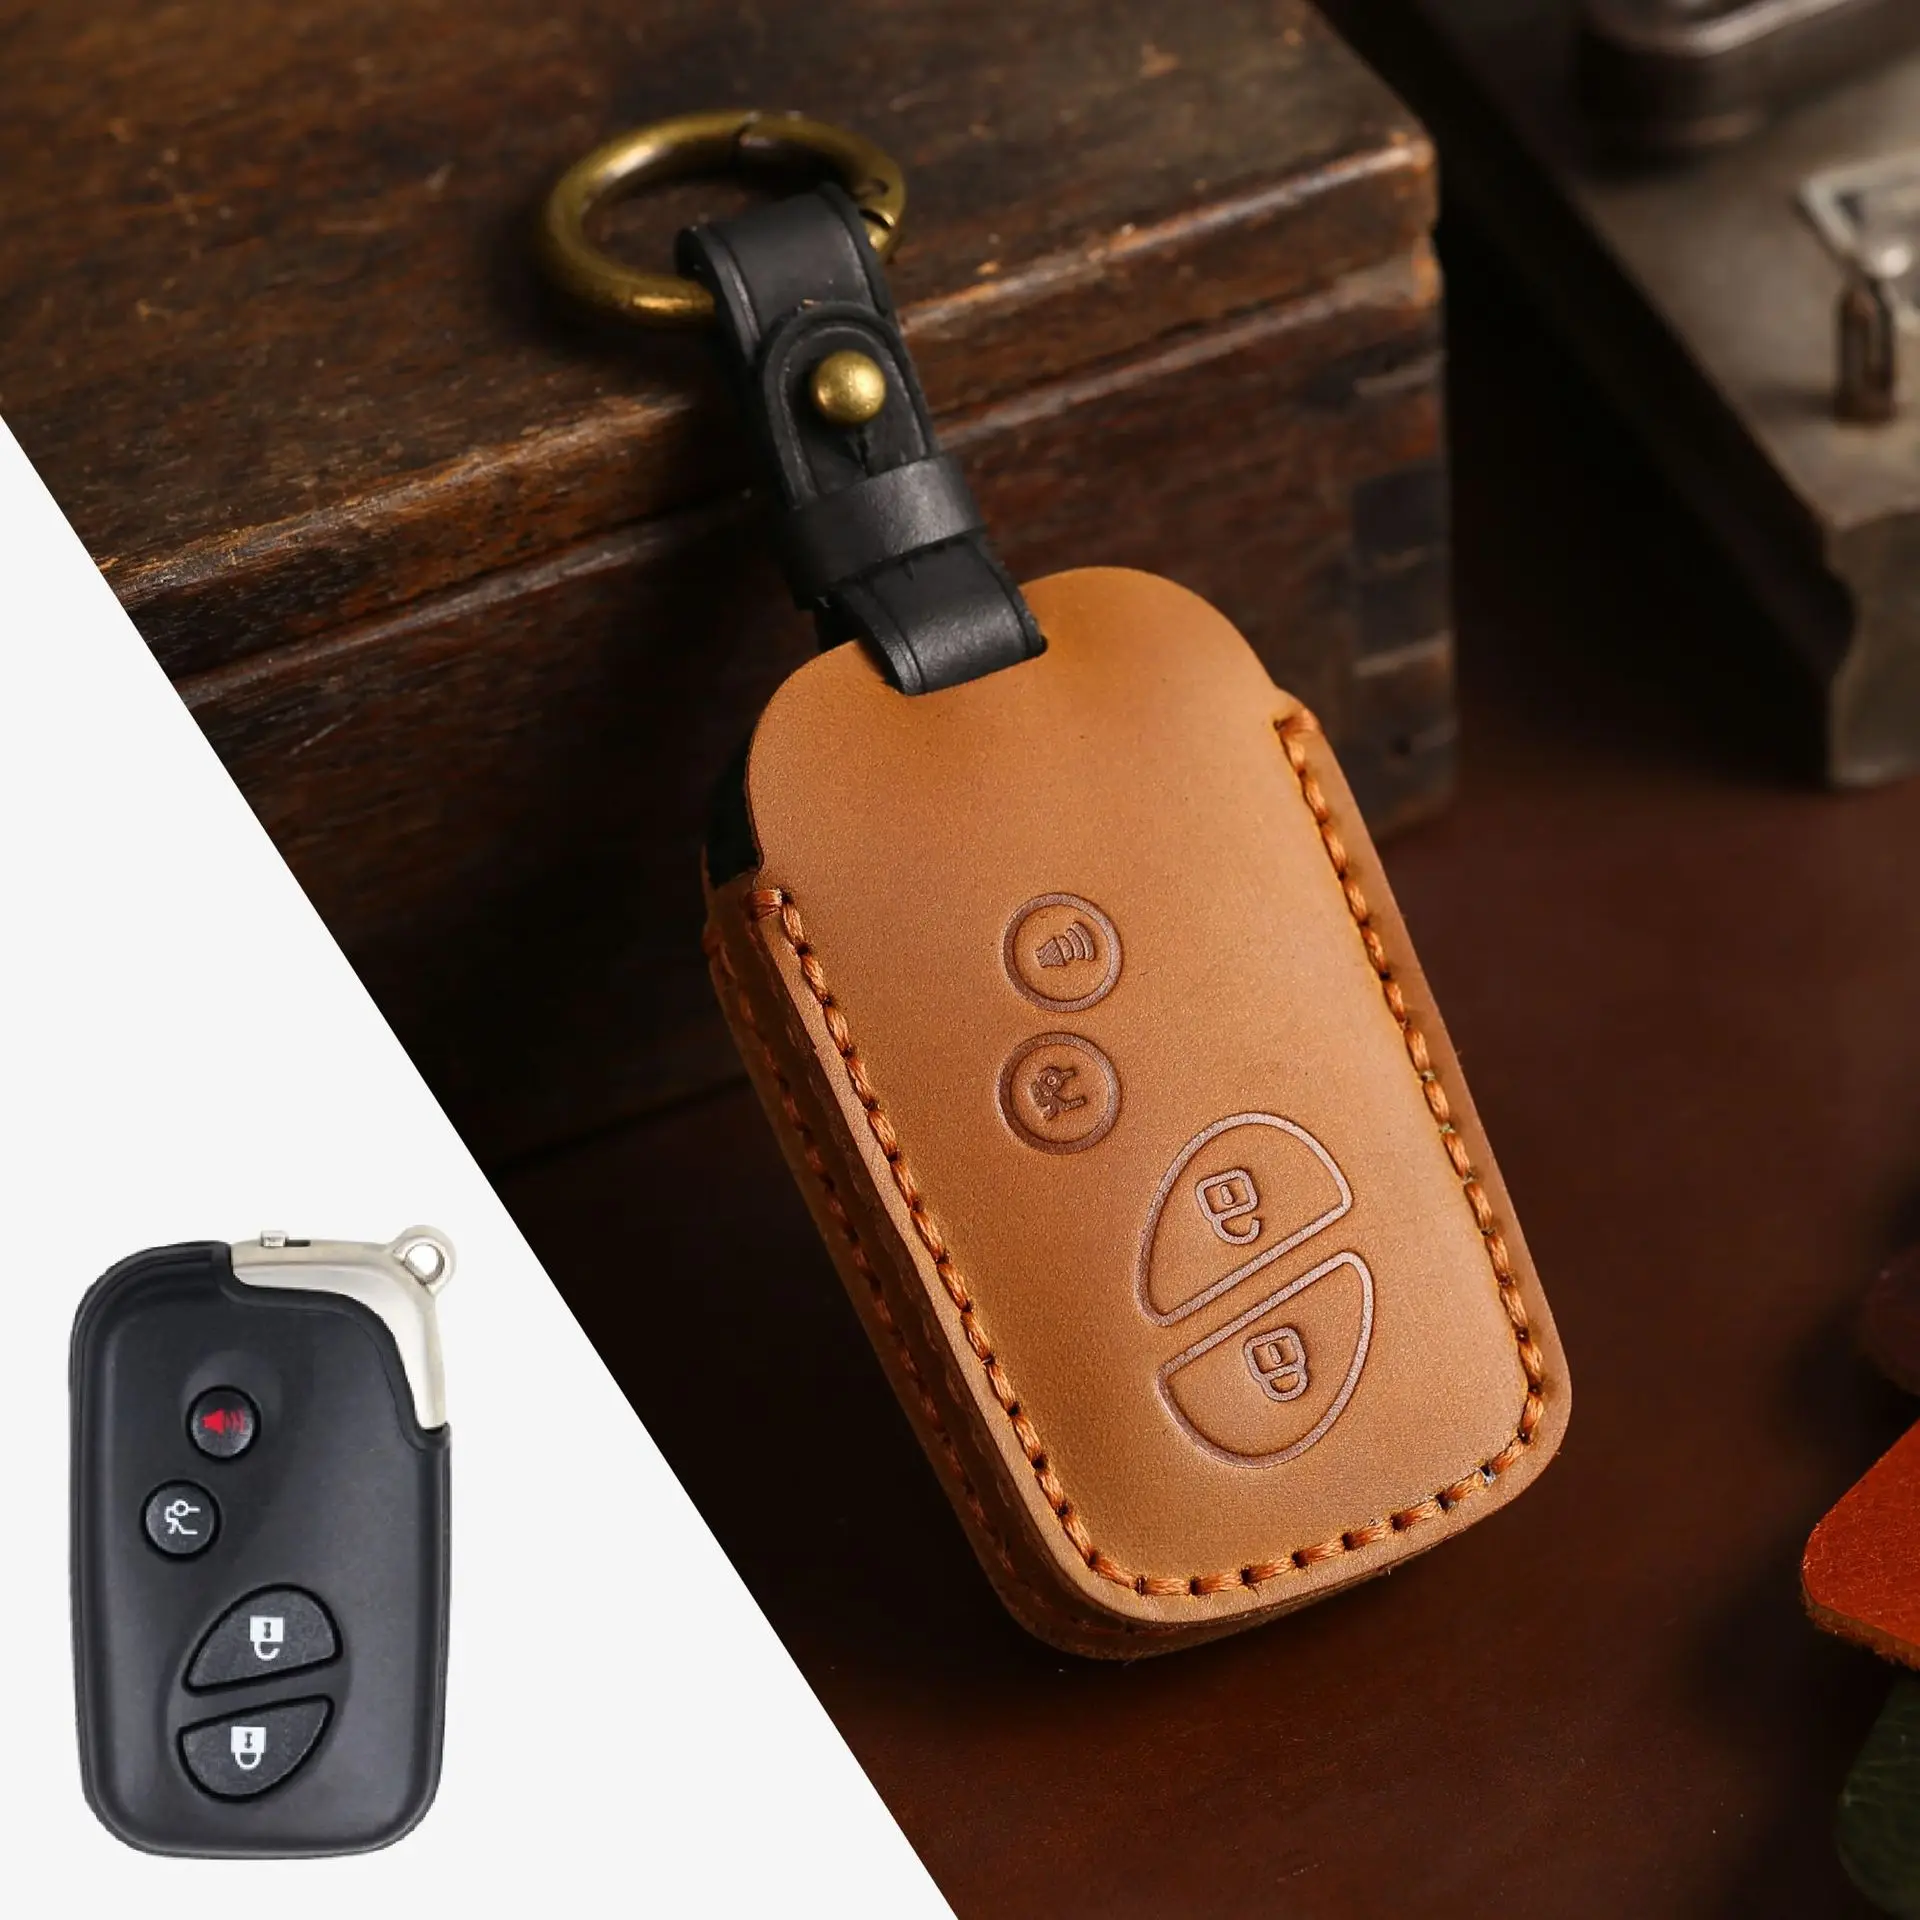 

Genuine Leather Car Key Cover Fob for Lexus Lexus CT200H GX400 GX460 IS250 IS300C RX270 ES240 ES350 LS460 GS300 450h 460h